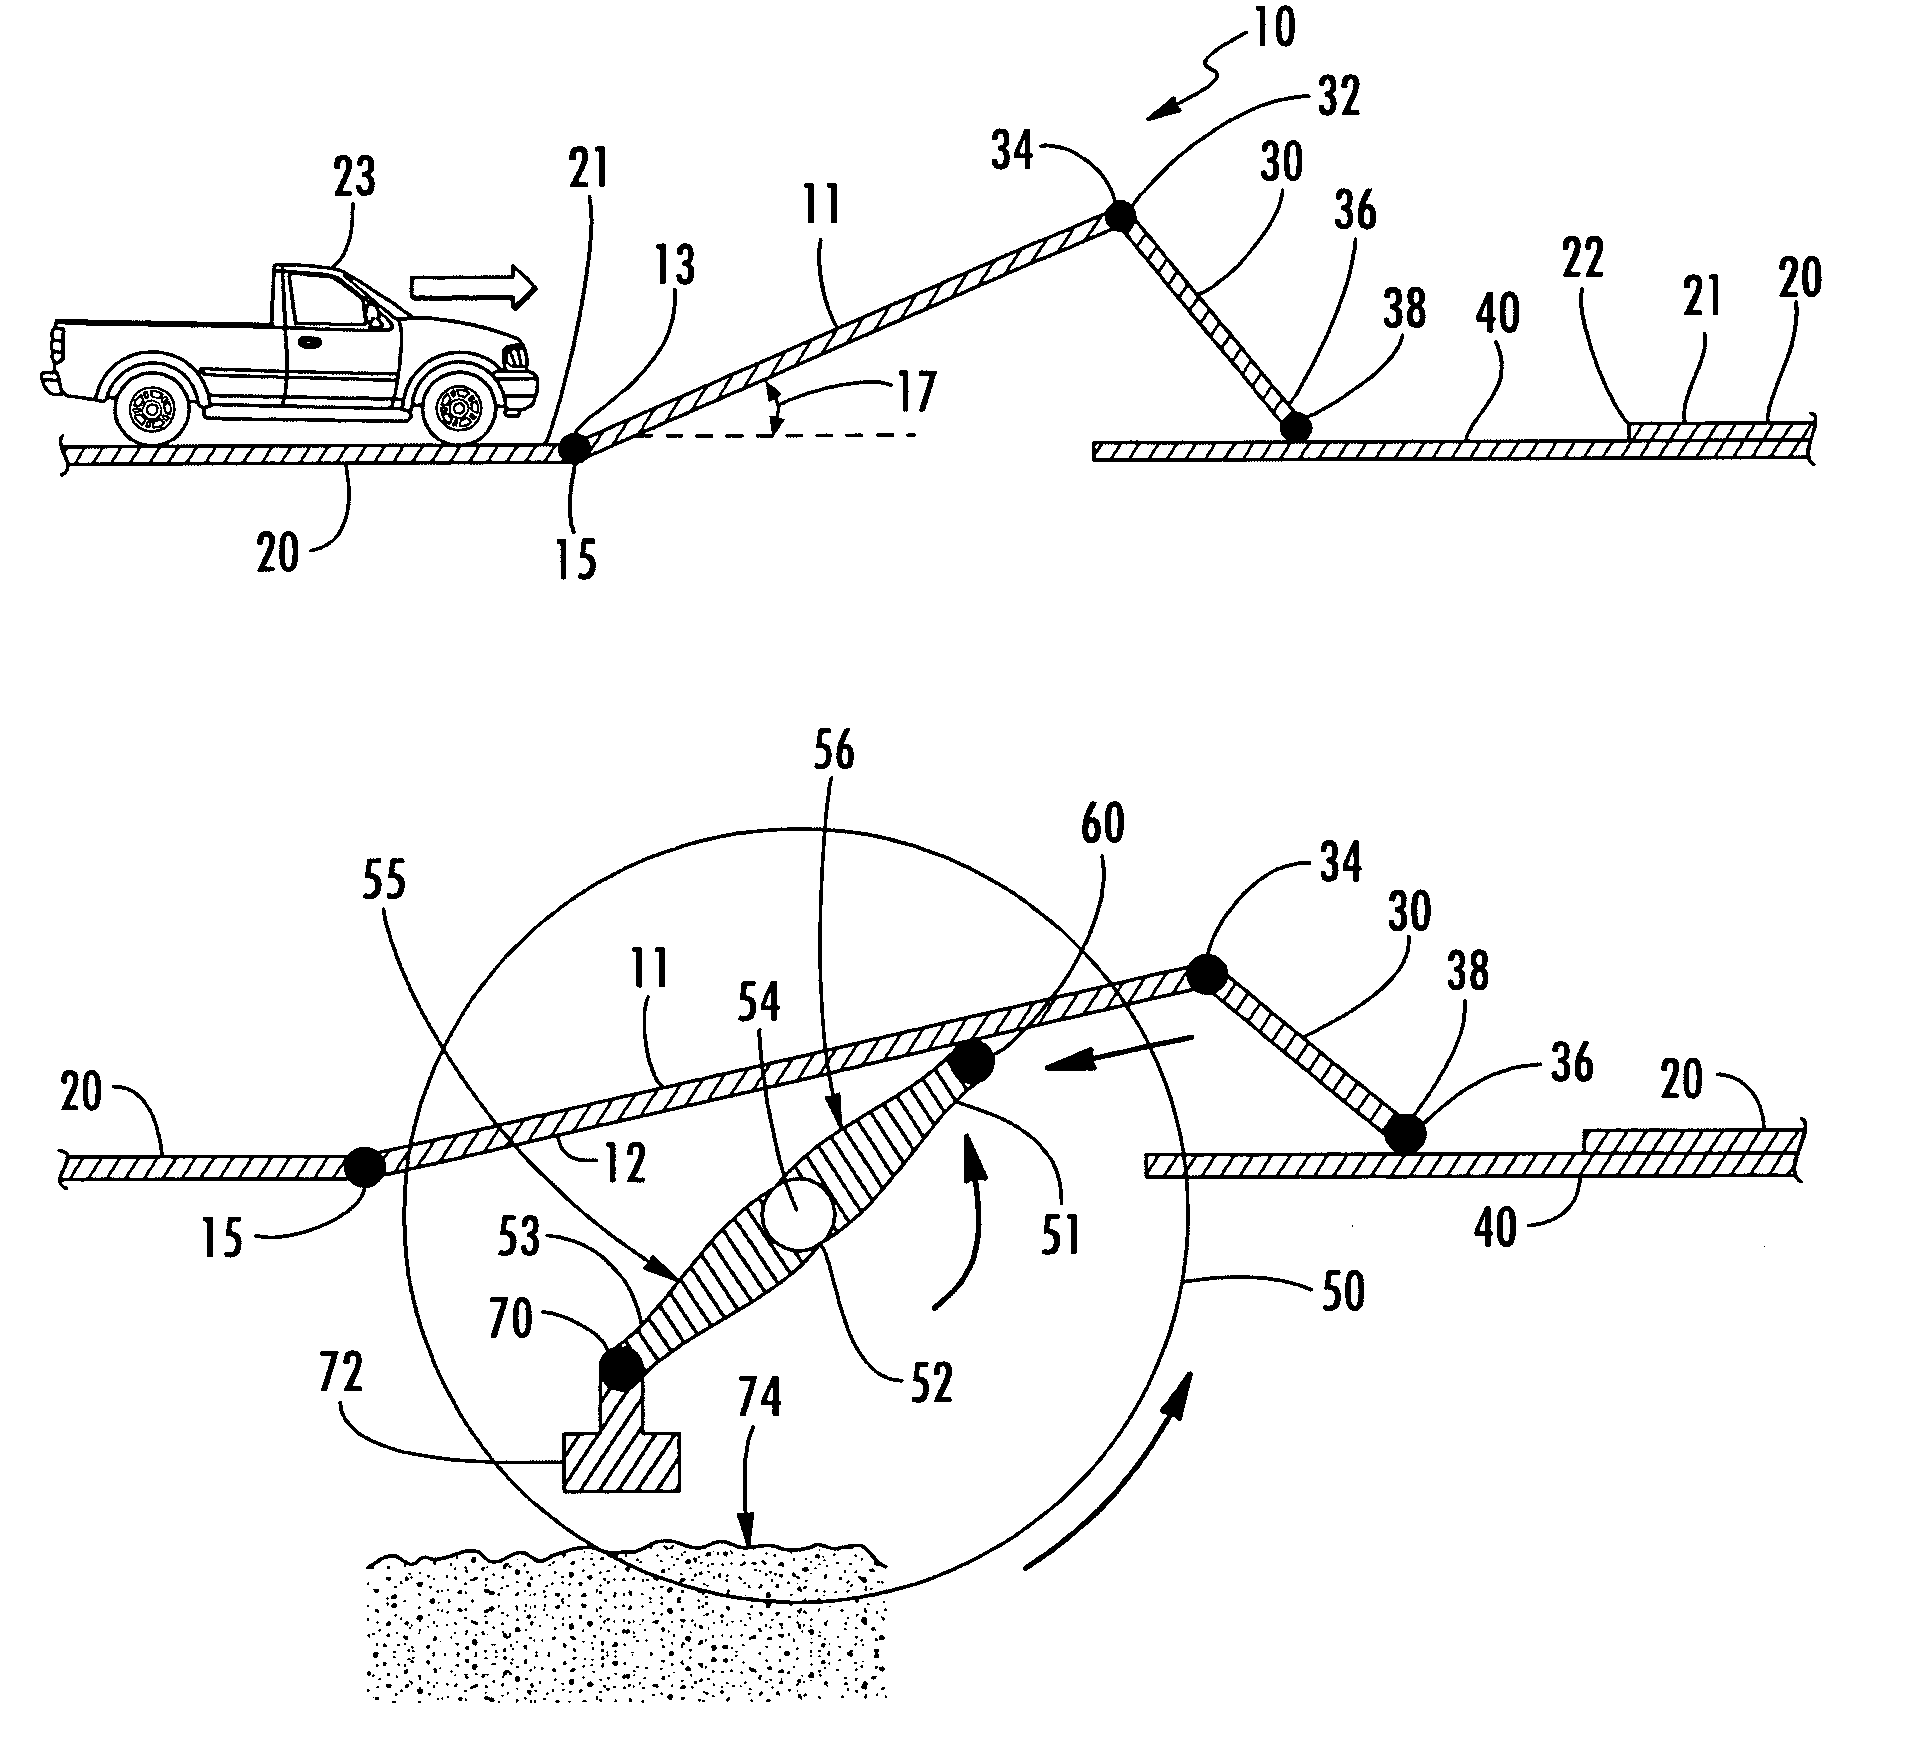 System for generating electricity by using gravitational mass and/or momentum of moving vehicle